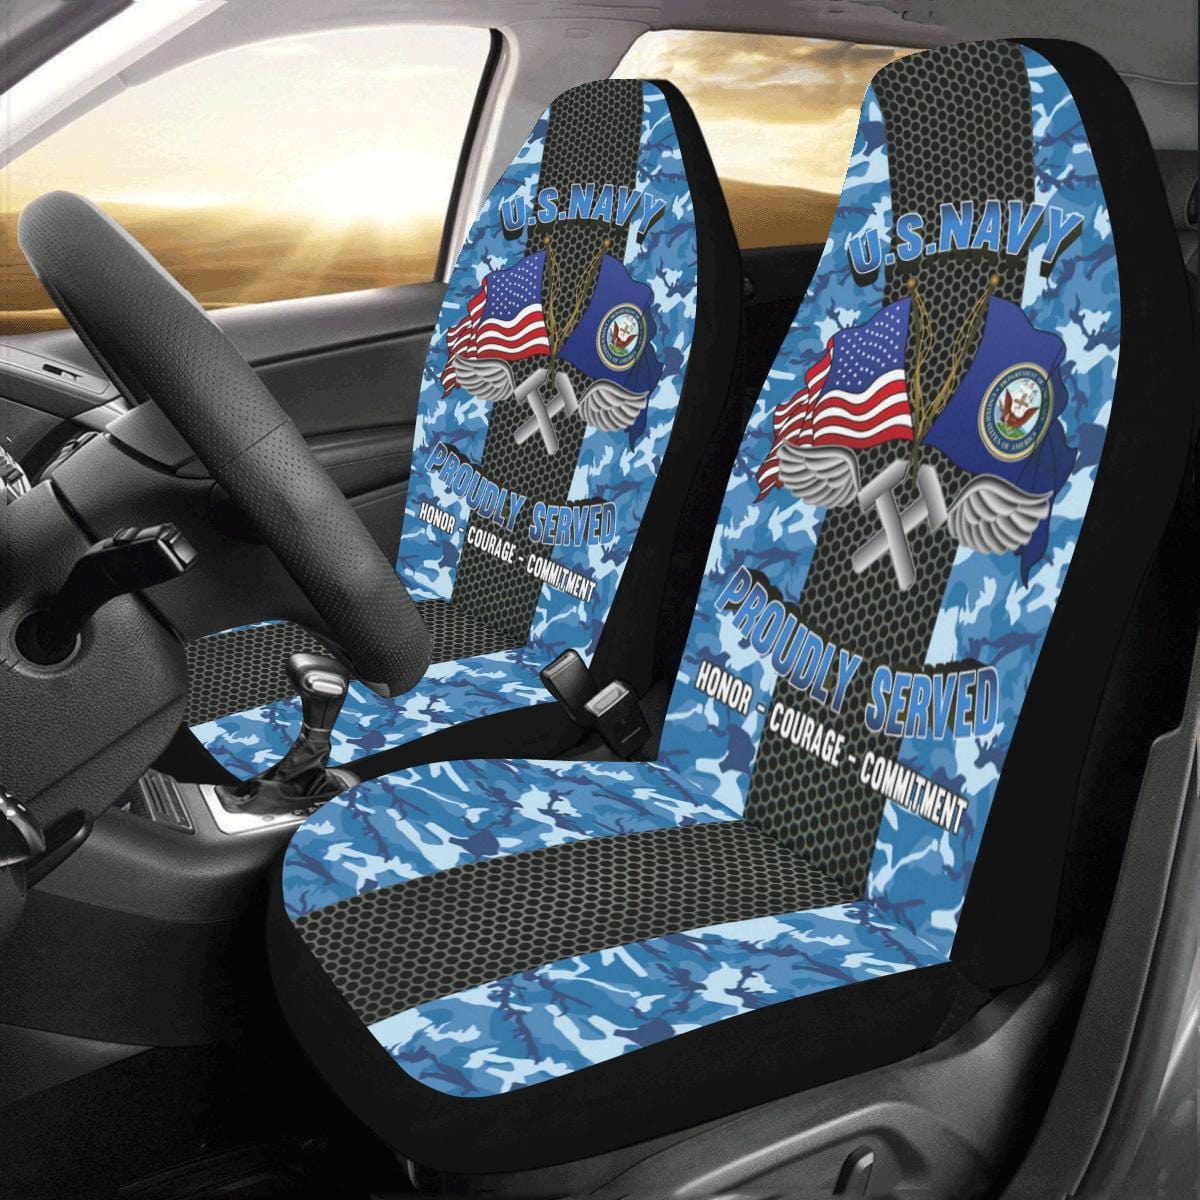 Navy Aviation Structural Mechanic Navy AM Car Seat Covers (Set of 2)-SeatCovers-Navy-Rate-Veterans Nation